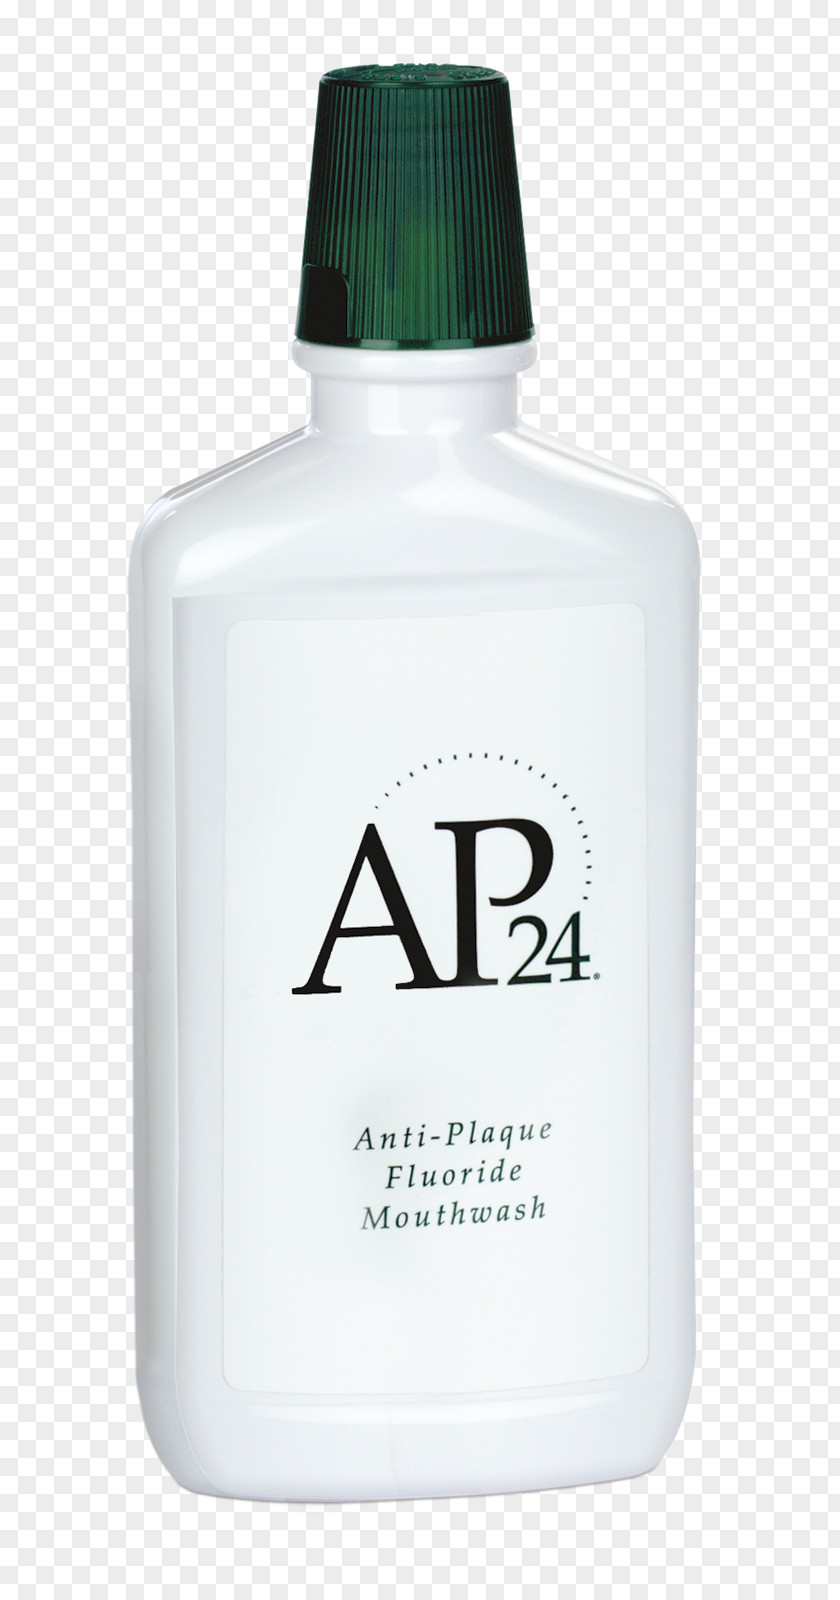 Toothpaste Mouthwash Lotion Dental Plaque AP-24 Whitening PNG